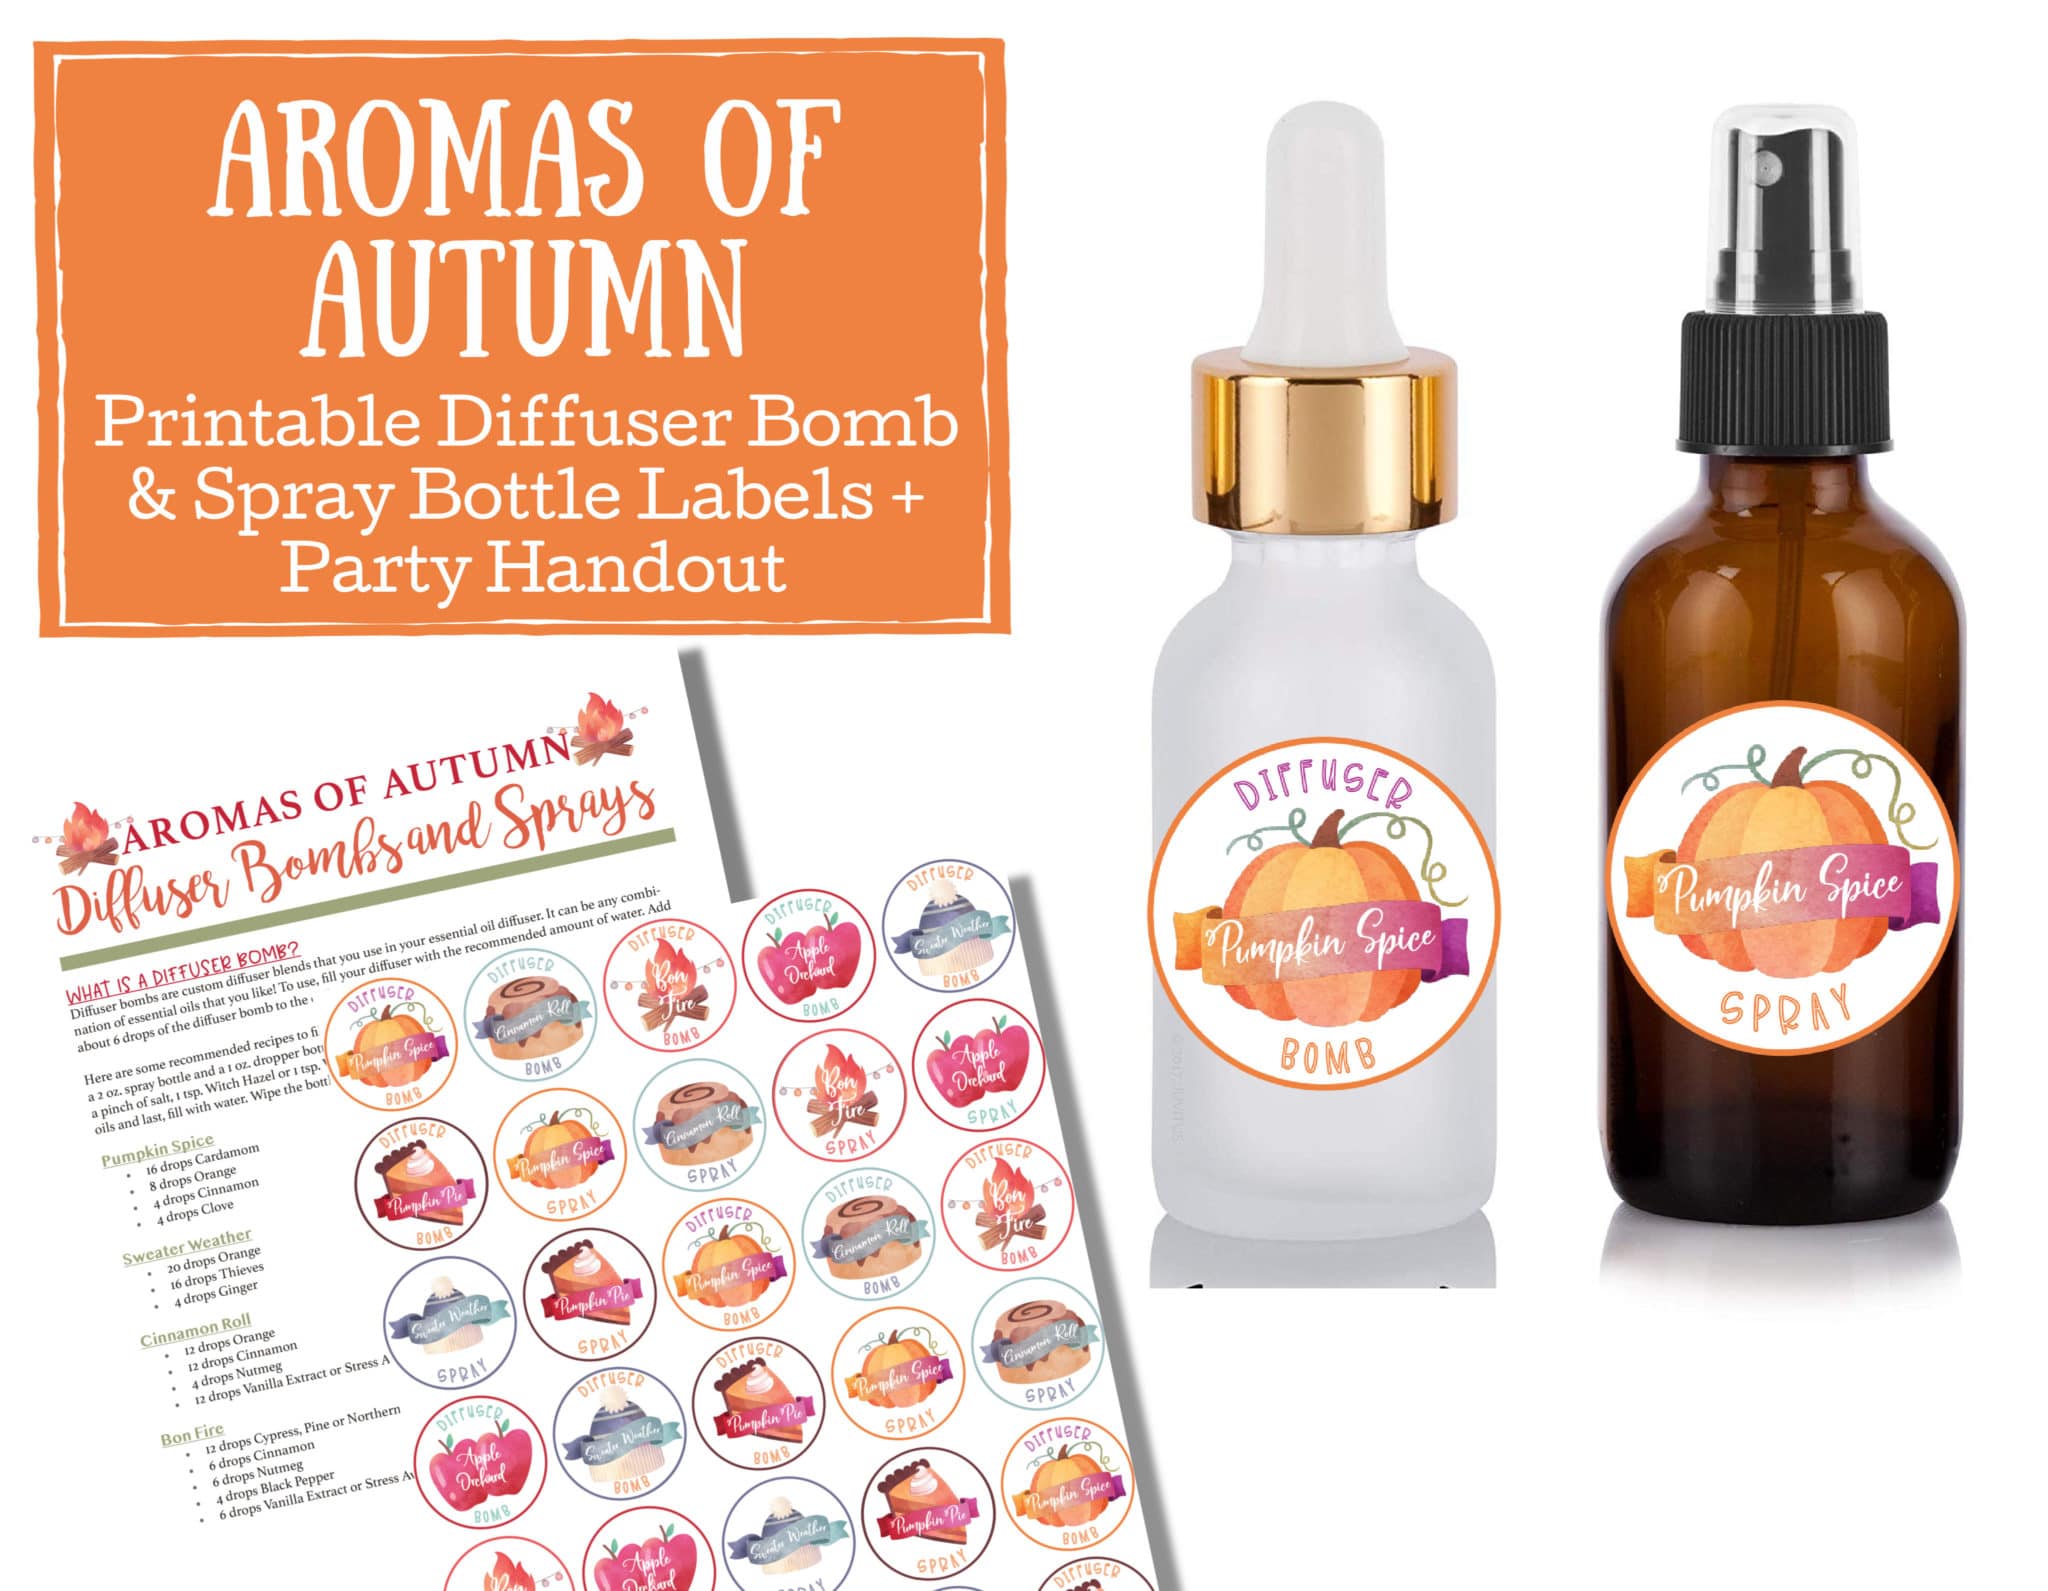 Aromas of Autumn - printable Fall Diffuser Bomb and Spray Bottle Labels on Etsy